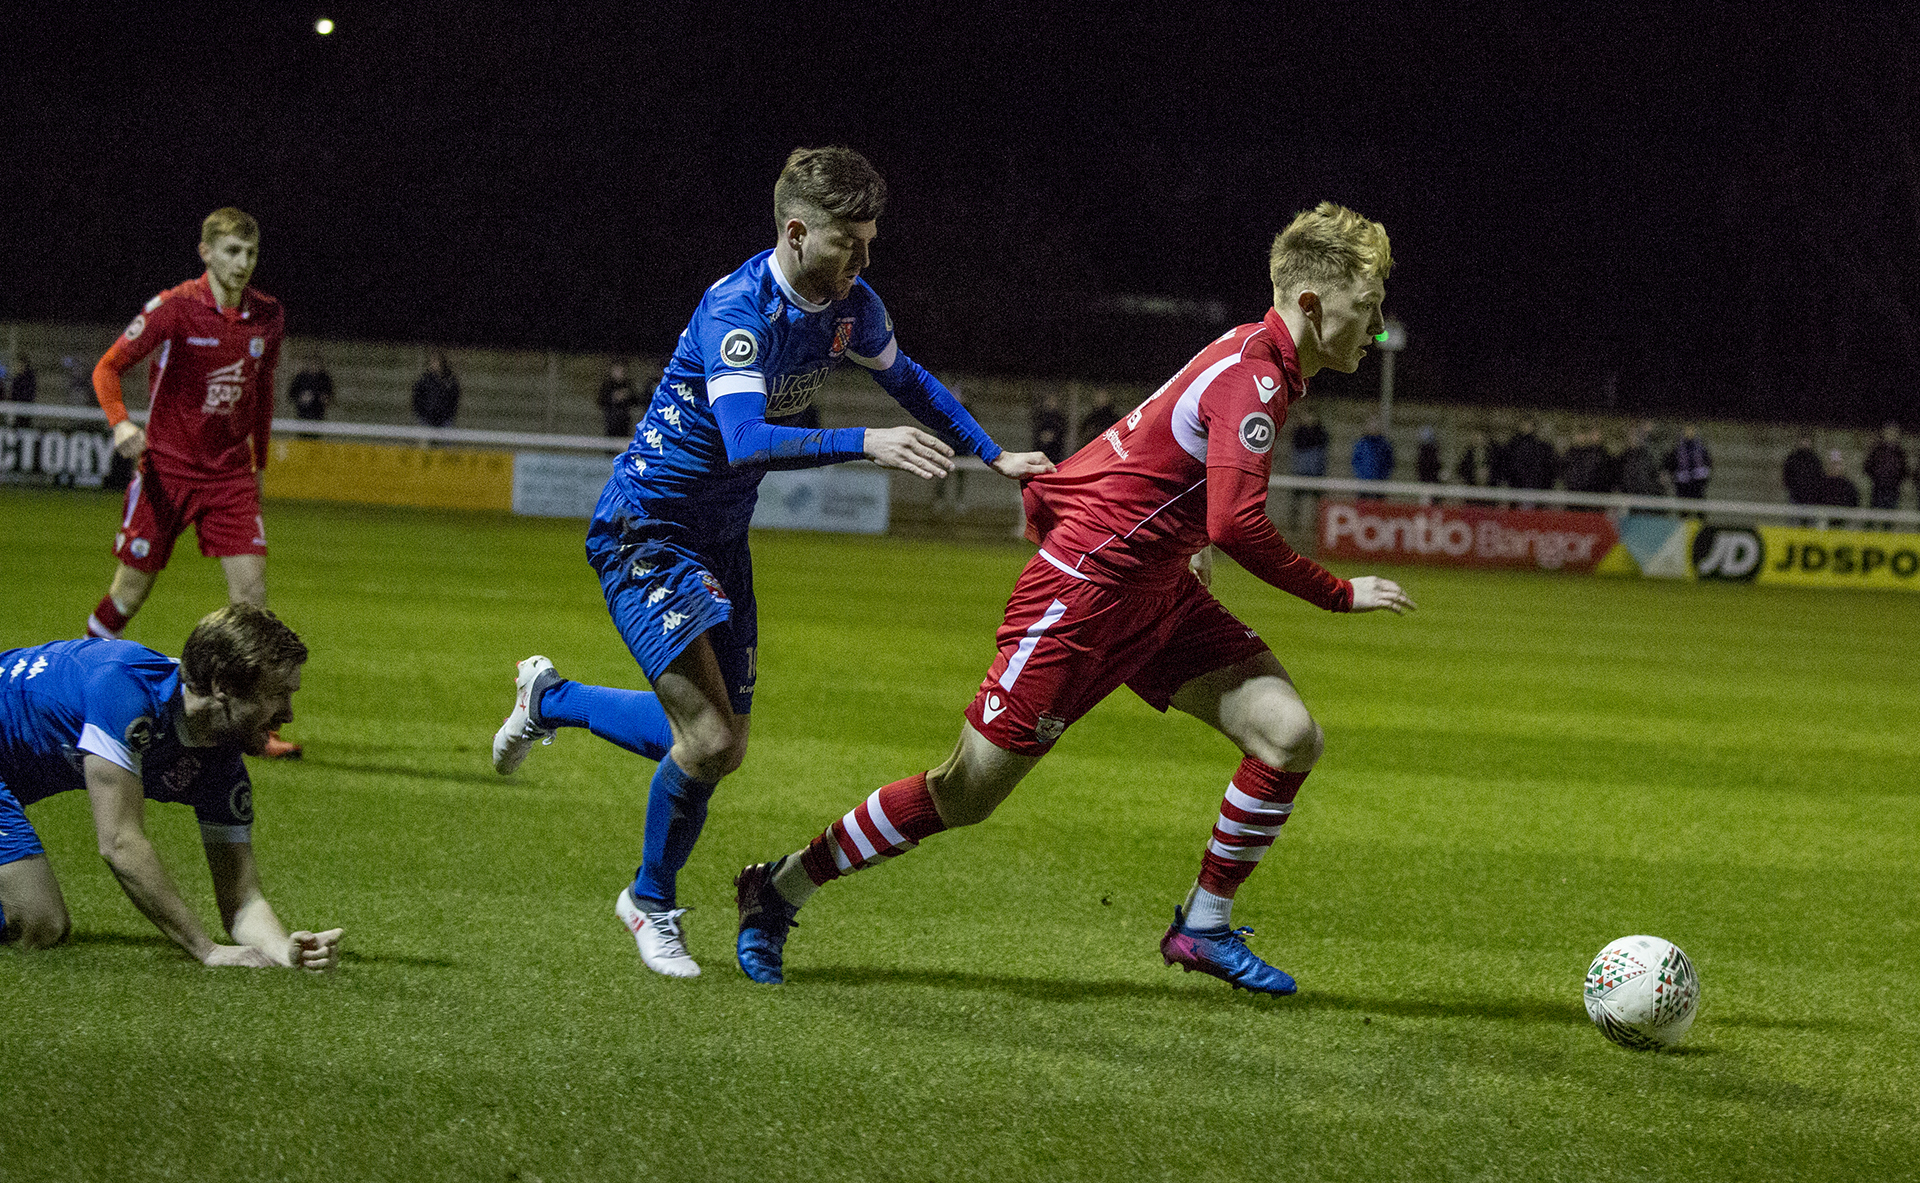 Declan Poole goes on the offensive early on for The Nomads - © NCM Media